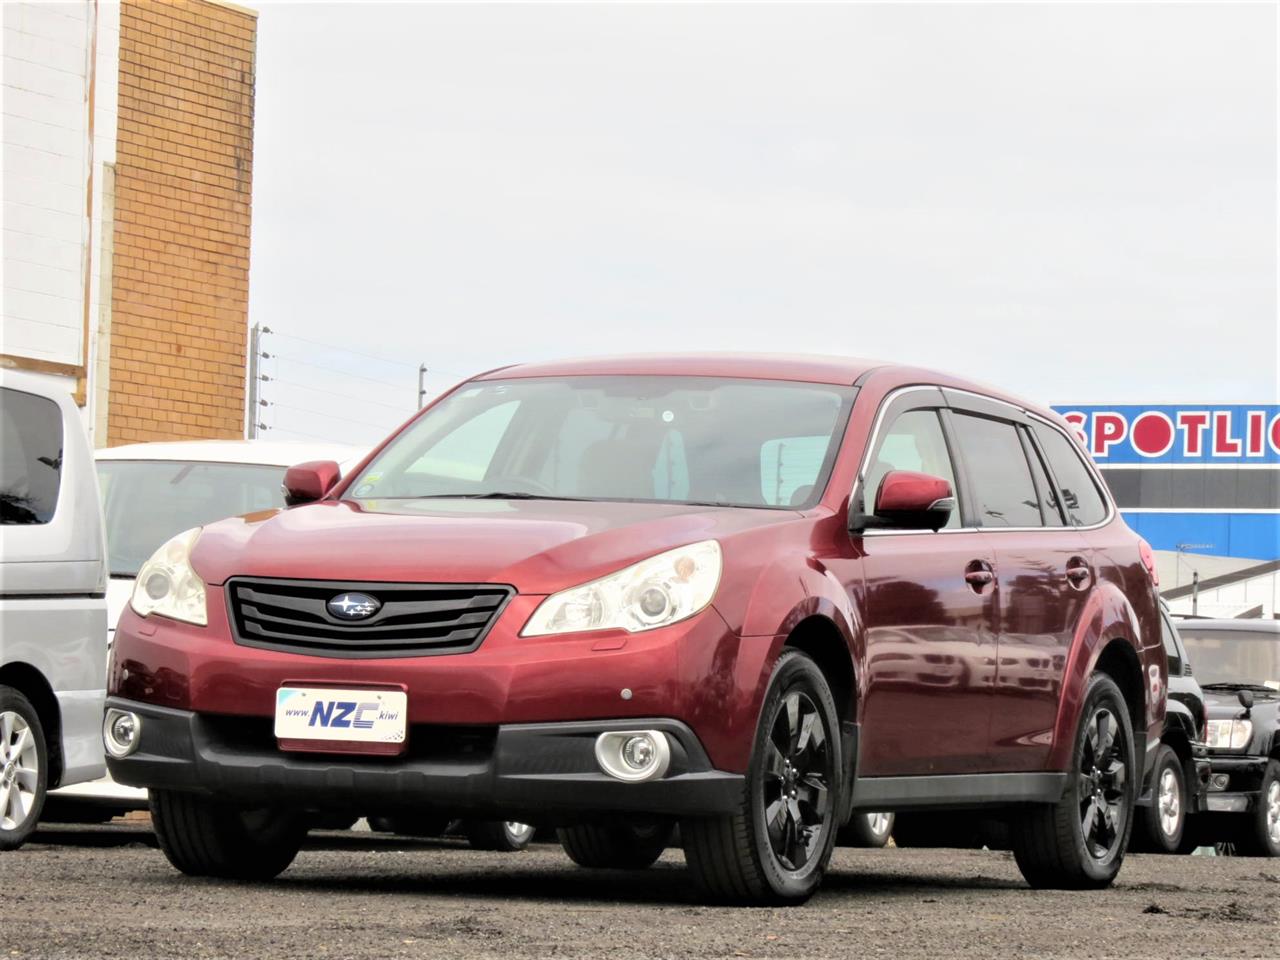 2011 Subaru Outback only $43 weekly